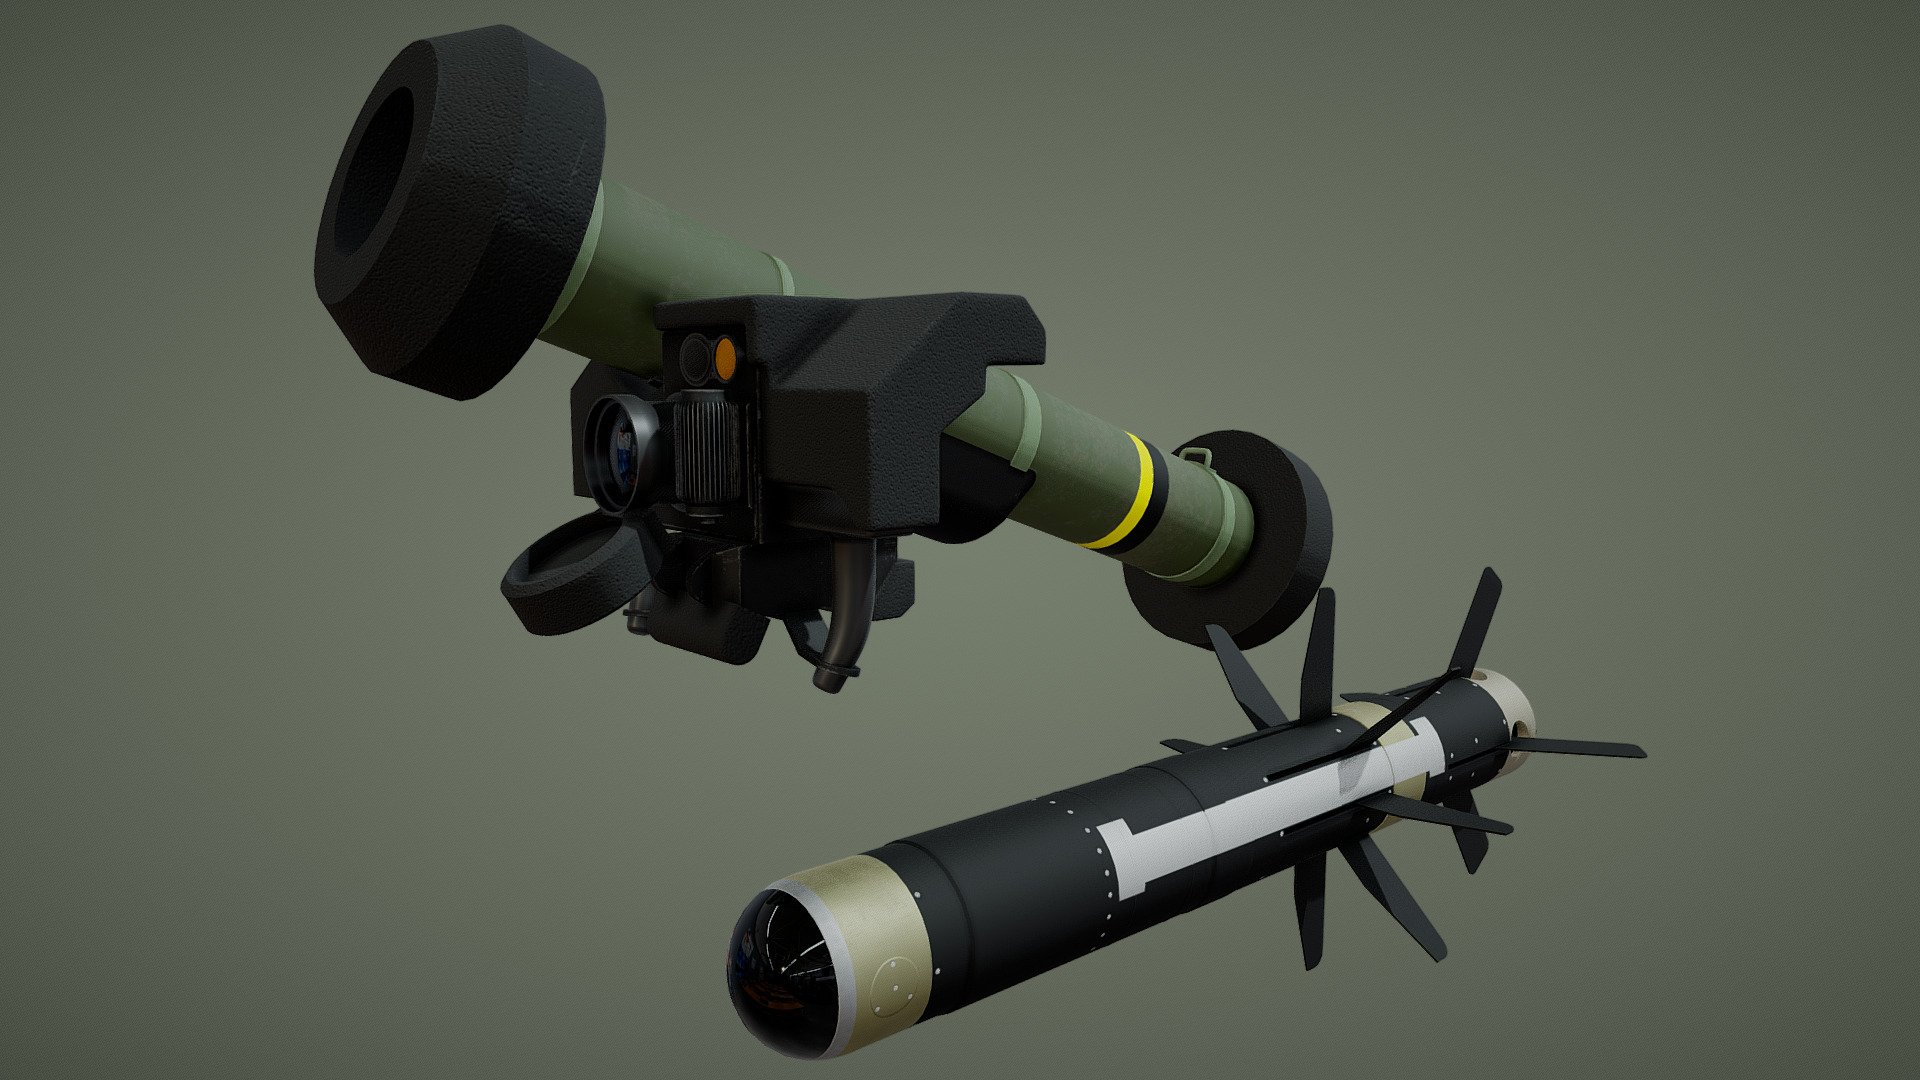 The FGM-148 Javelin, or Advanced Anti-Tank Weapon System-Medium (AAWS-M), is an American-made portable anti-tank missile system in service since 1996, and continuously upgraded. It replaced the M47 Dragon anti-tank missile in US service. Its fire-and-forget design uses automatic infrared guidance that allows the user to seek cover immediately after launch, in contrast to wire-guided systems, like the system used by the Dragon, which require a user to guide the weapon throughout the engagement. The Javelin's high-explosive anti-tank (HEAT) warhead can defeat modern tanks by top attack, hitting them from above, where their armor is thinnest, and is also useful against fortifications in a direct attack flight 3d model